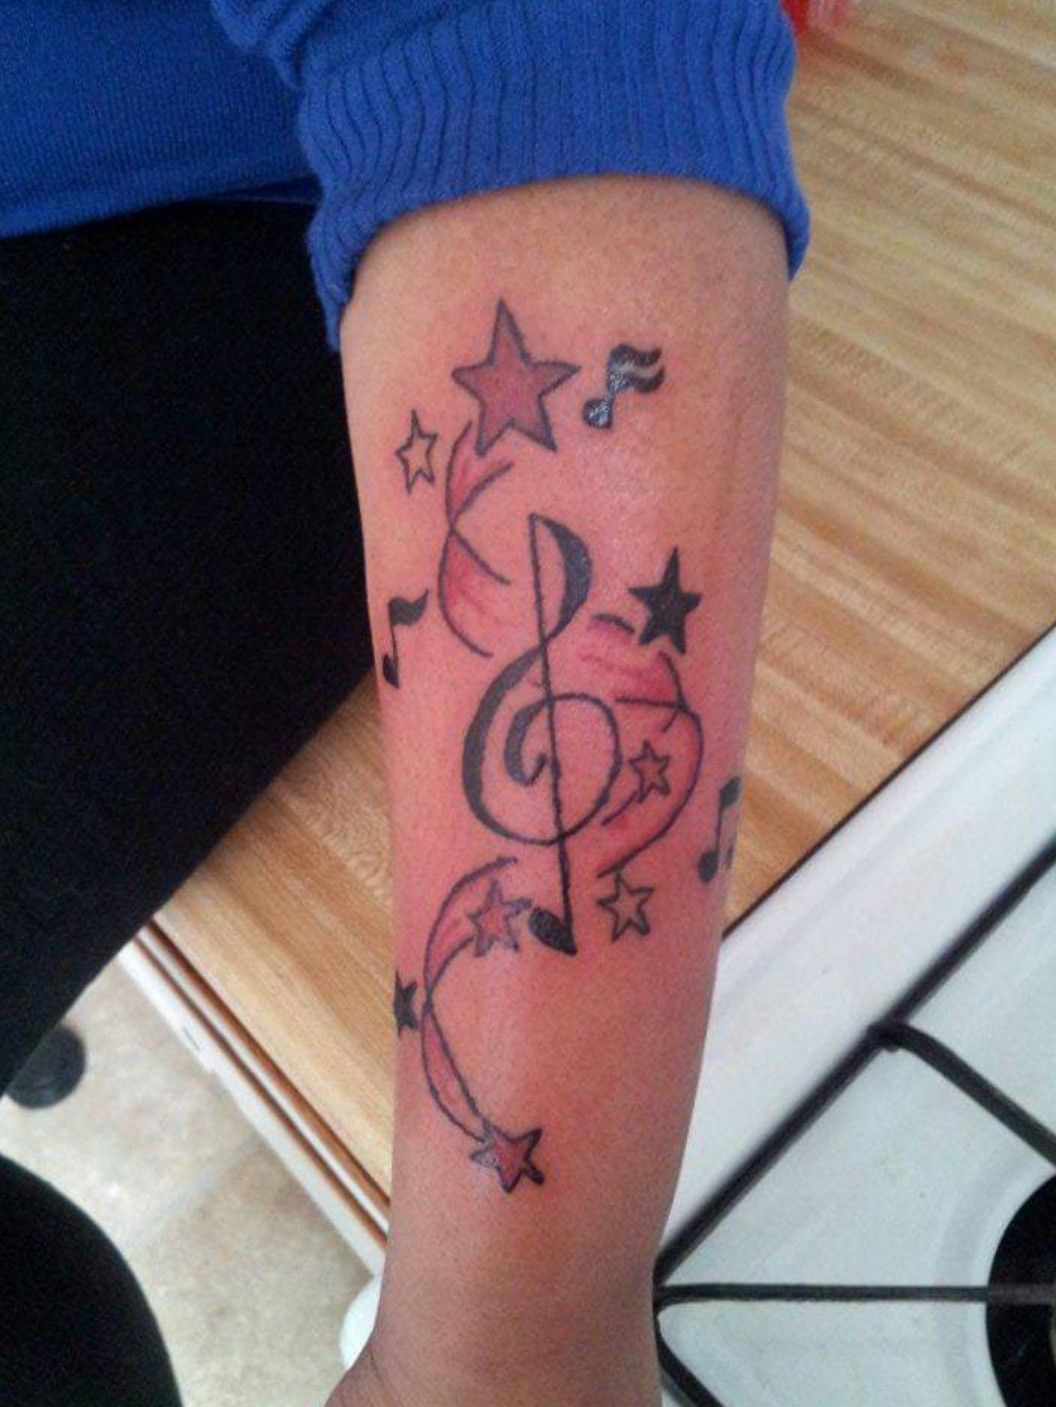 Tattoo uploaded by Keno • I added the music note in & red note trail along  with the other music notes • Tattoodo